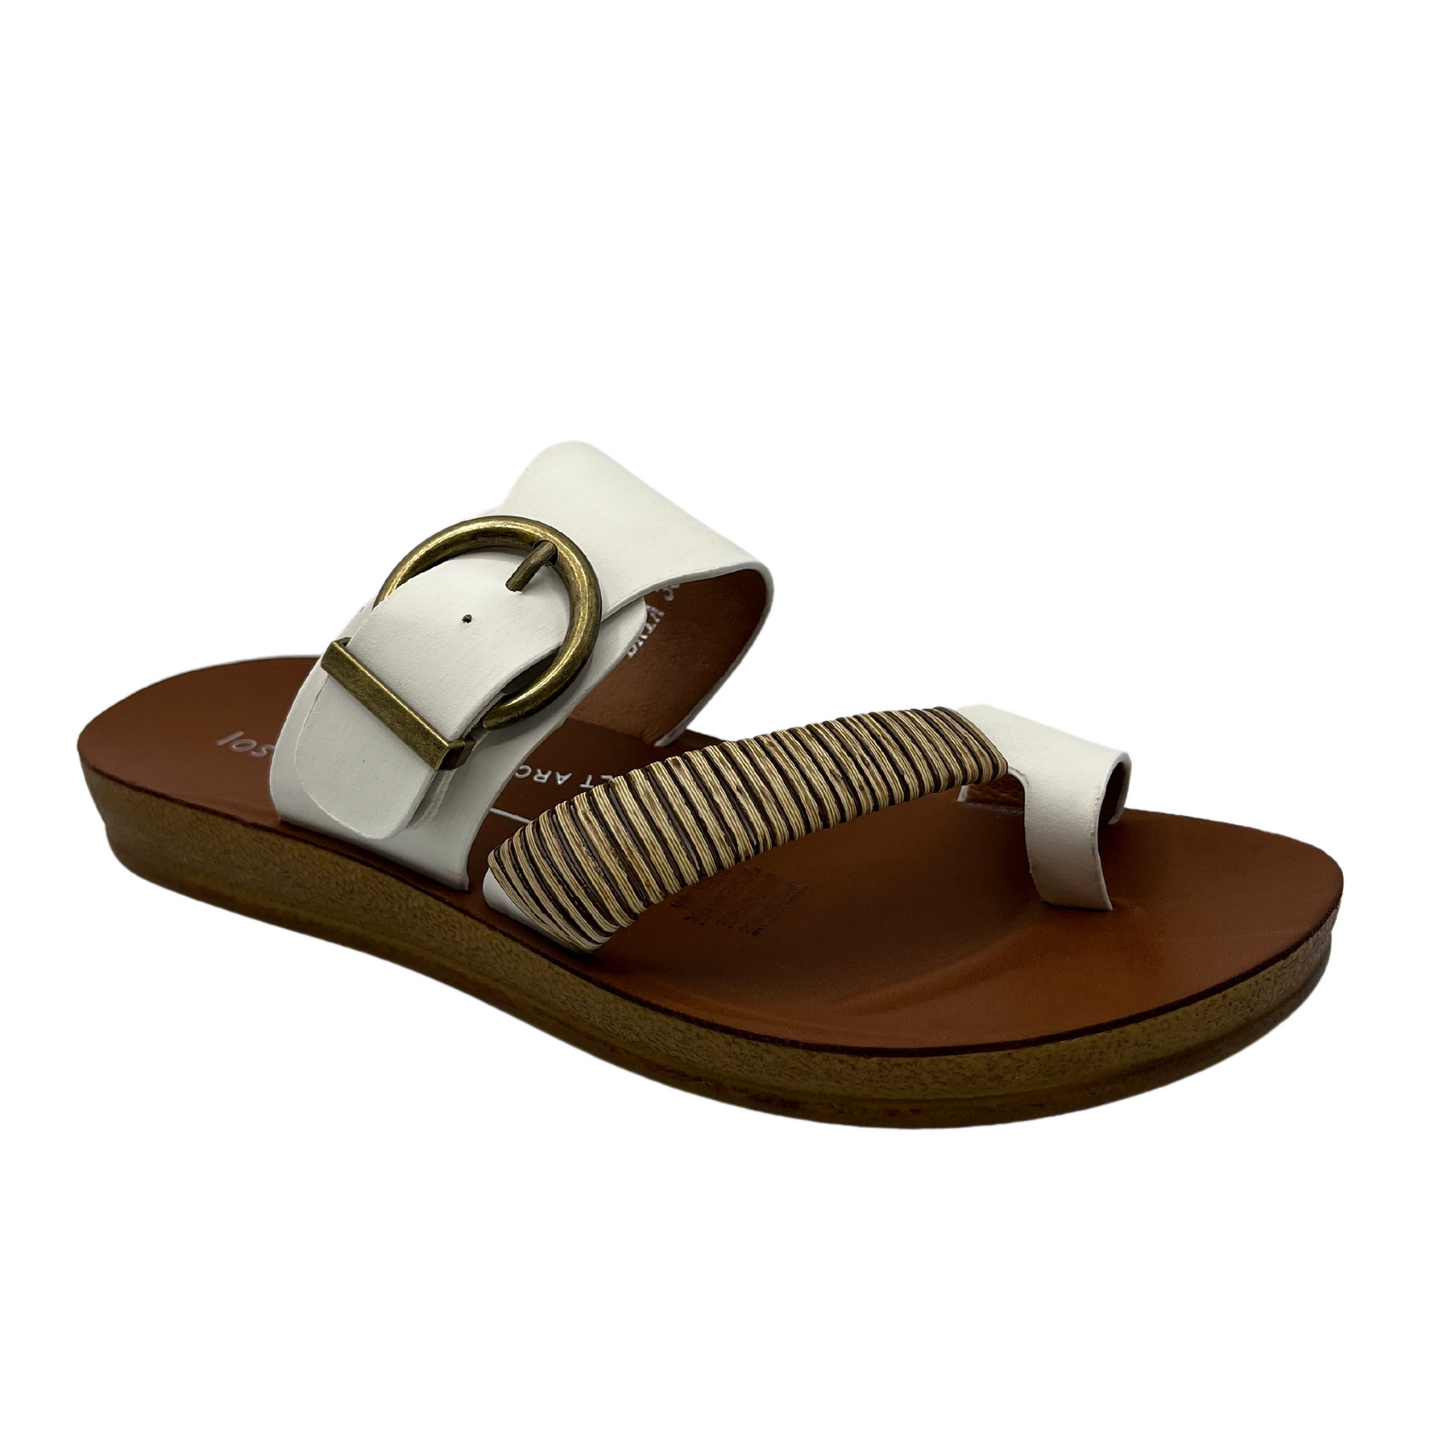 45 degree angled view of white leather sandal with gold buckle and brown insole